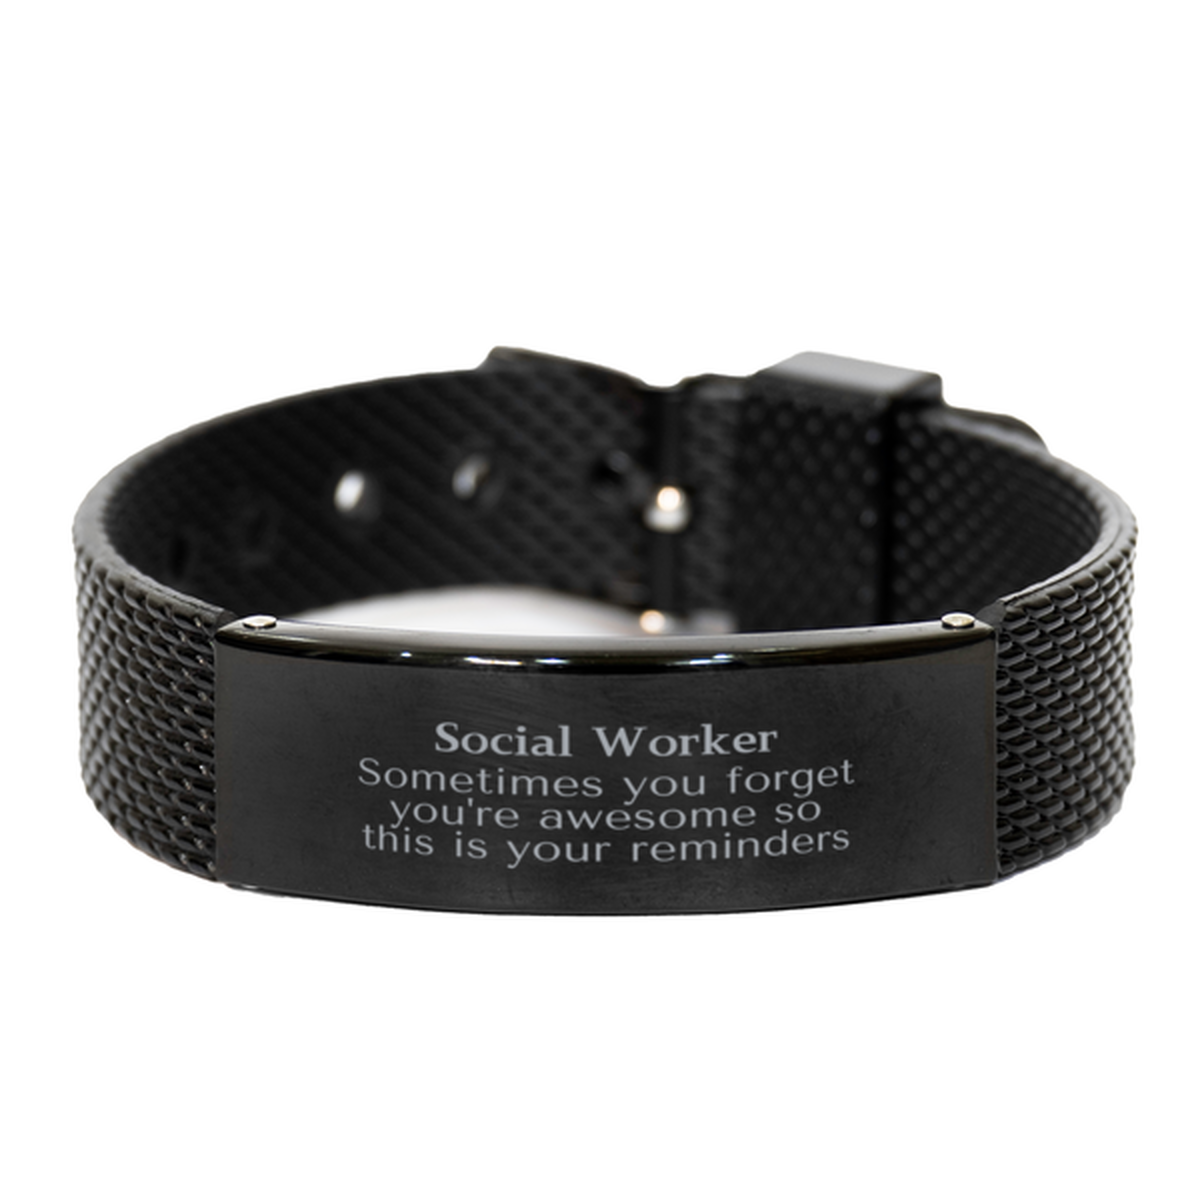 Sentimental Social Worker Black Shark Mesh Bracelet, Social Worker Sometimes you forget you're awesome so this is your reminders, Graduation Christmas Birthday Gifts for Social Worker, Men, Women, Coworkers